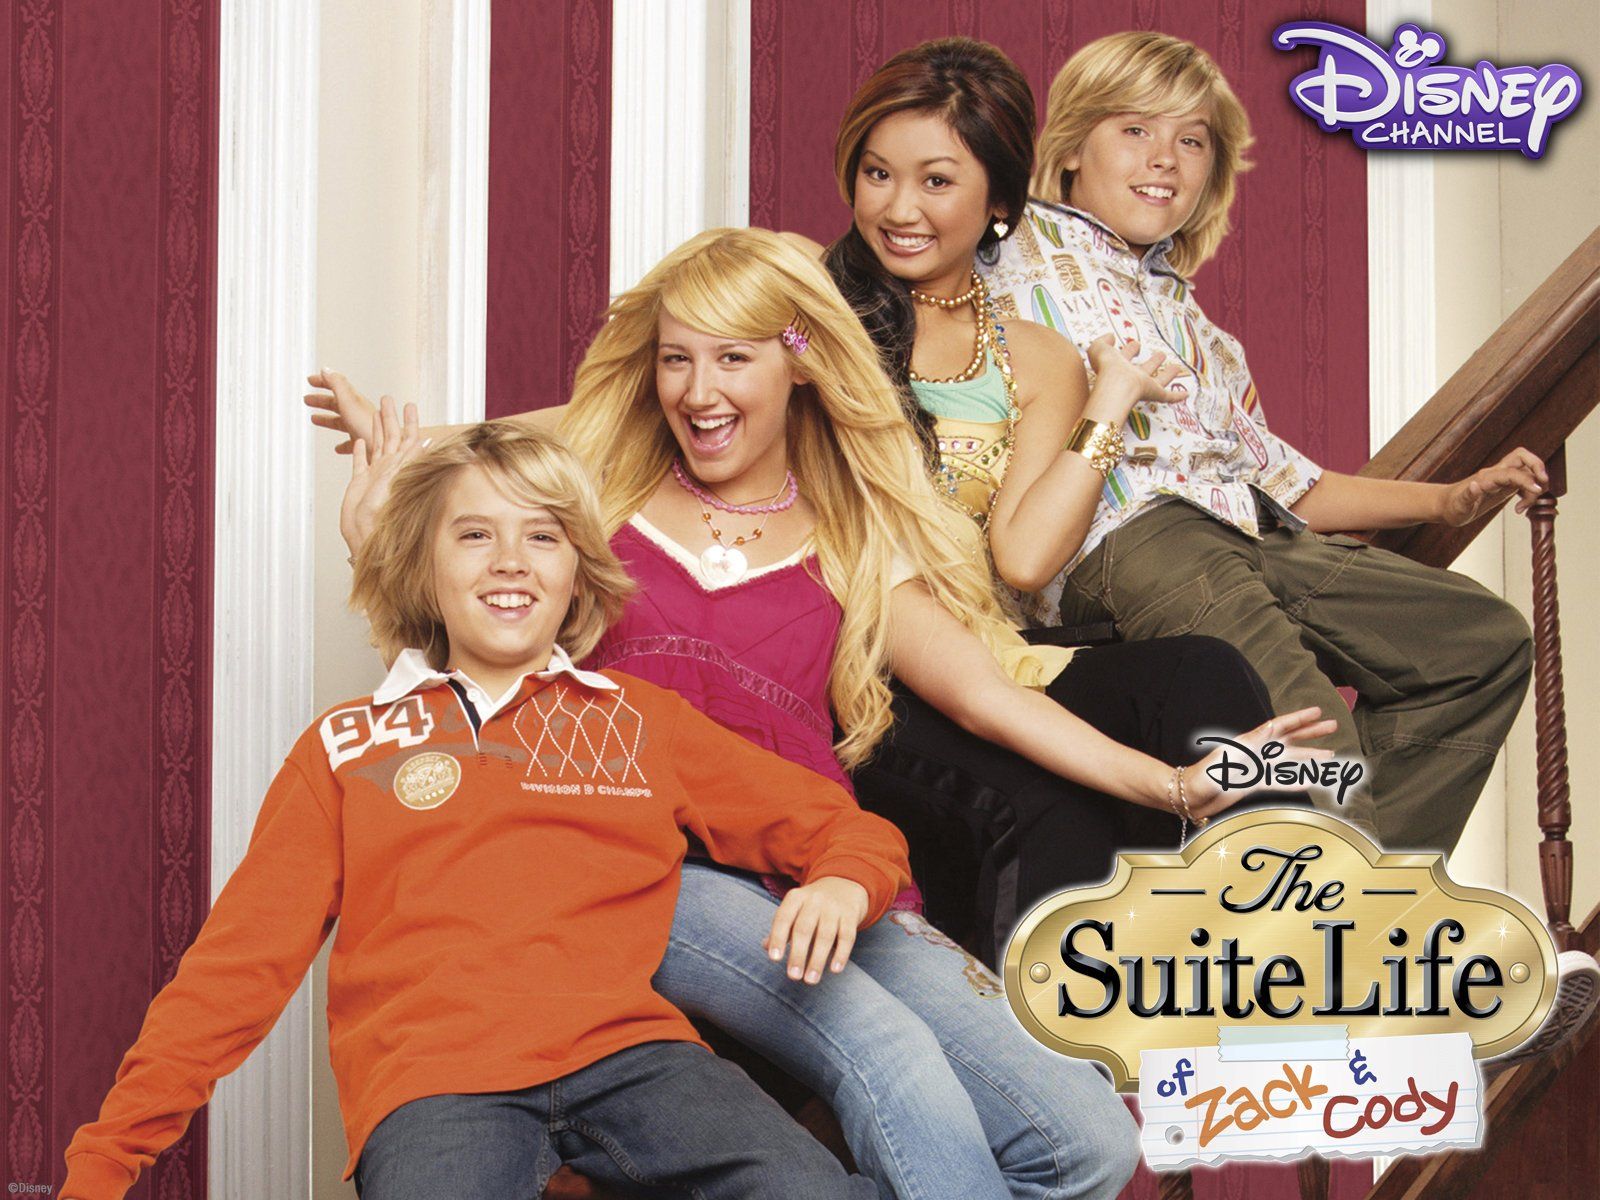 Watch The Suite Life of Zack & Cody Volume 4